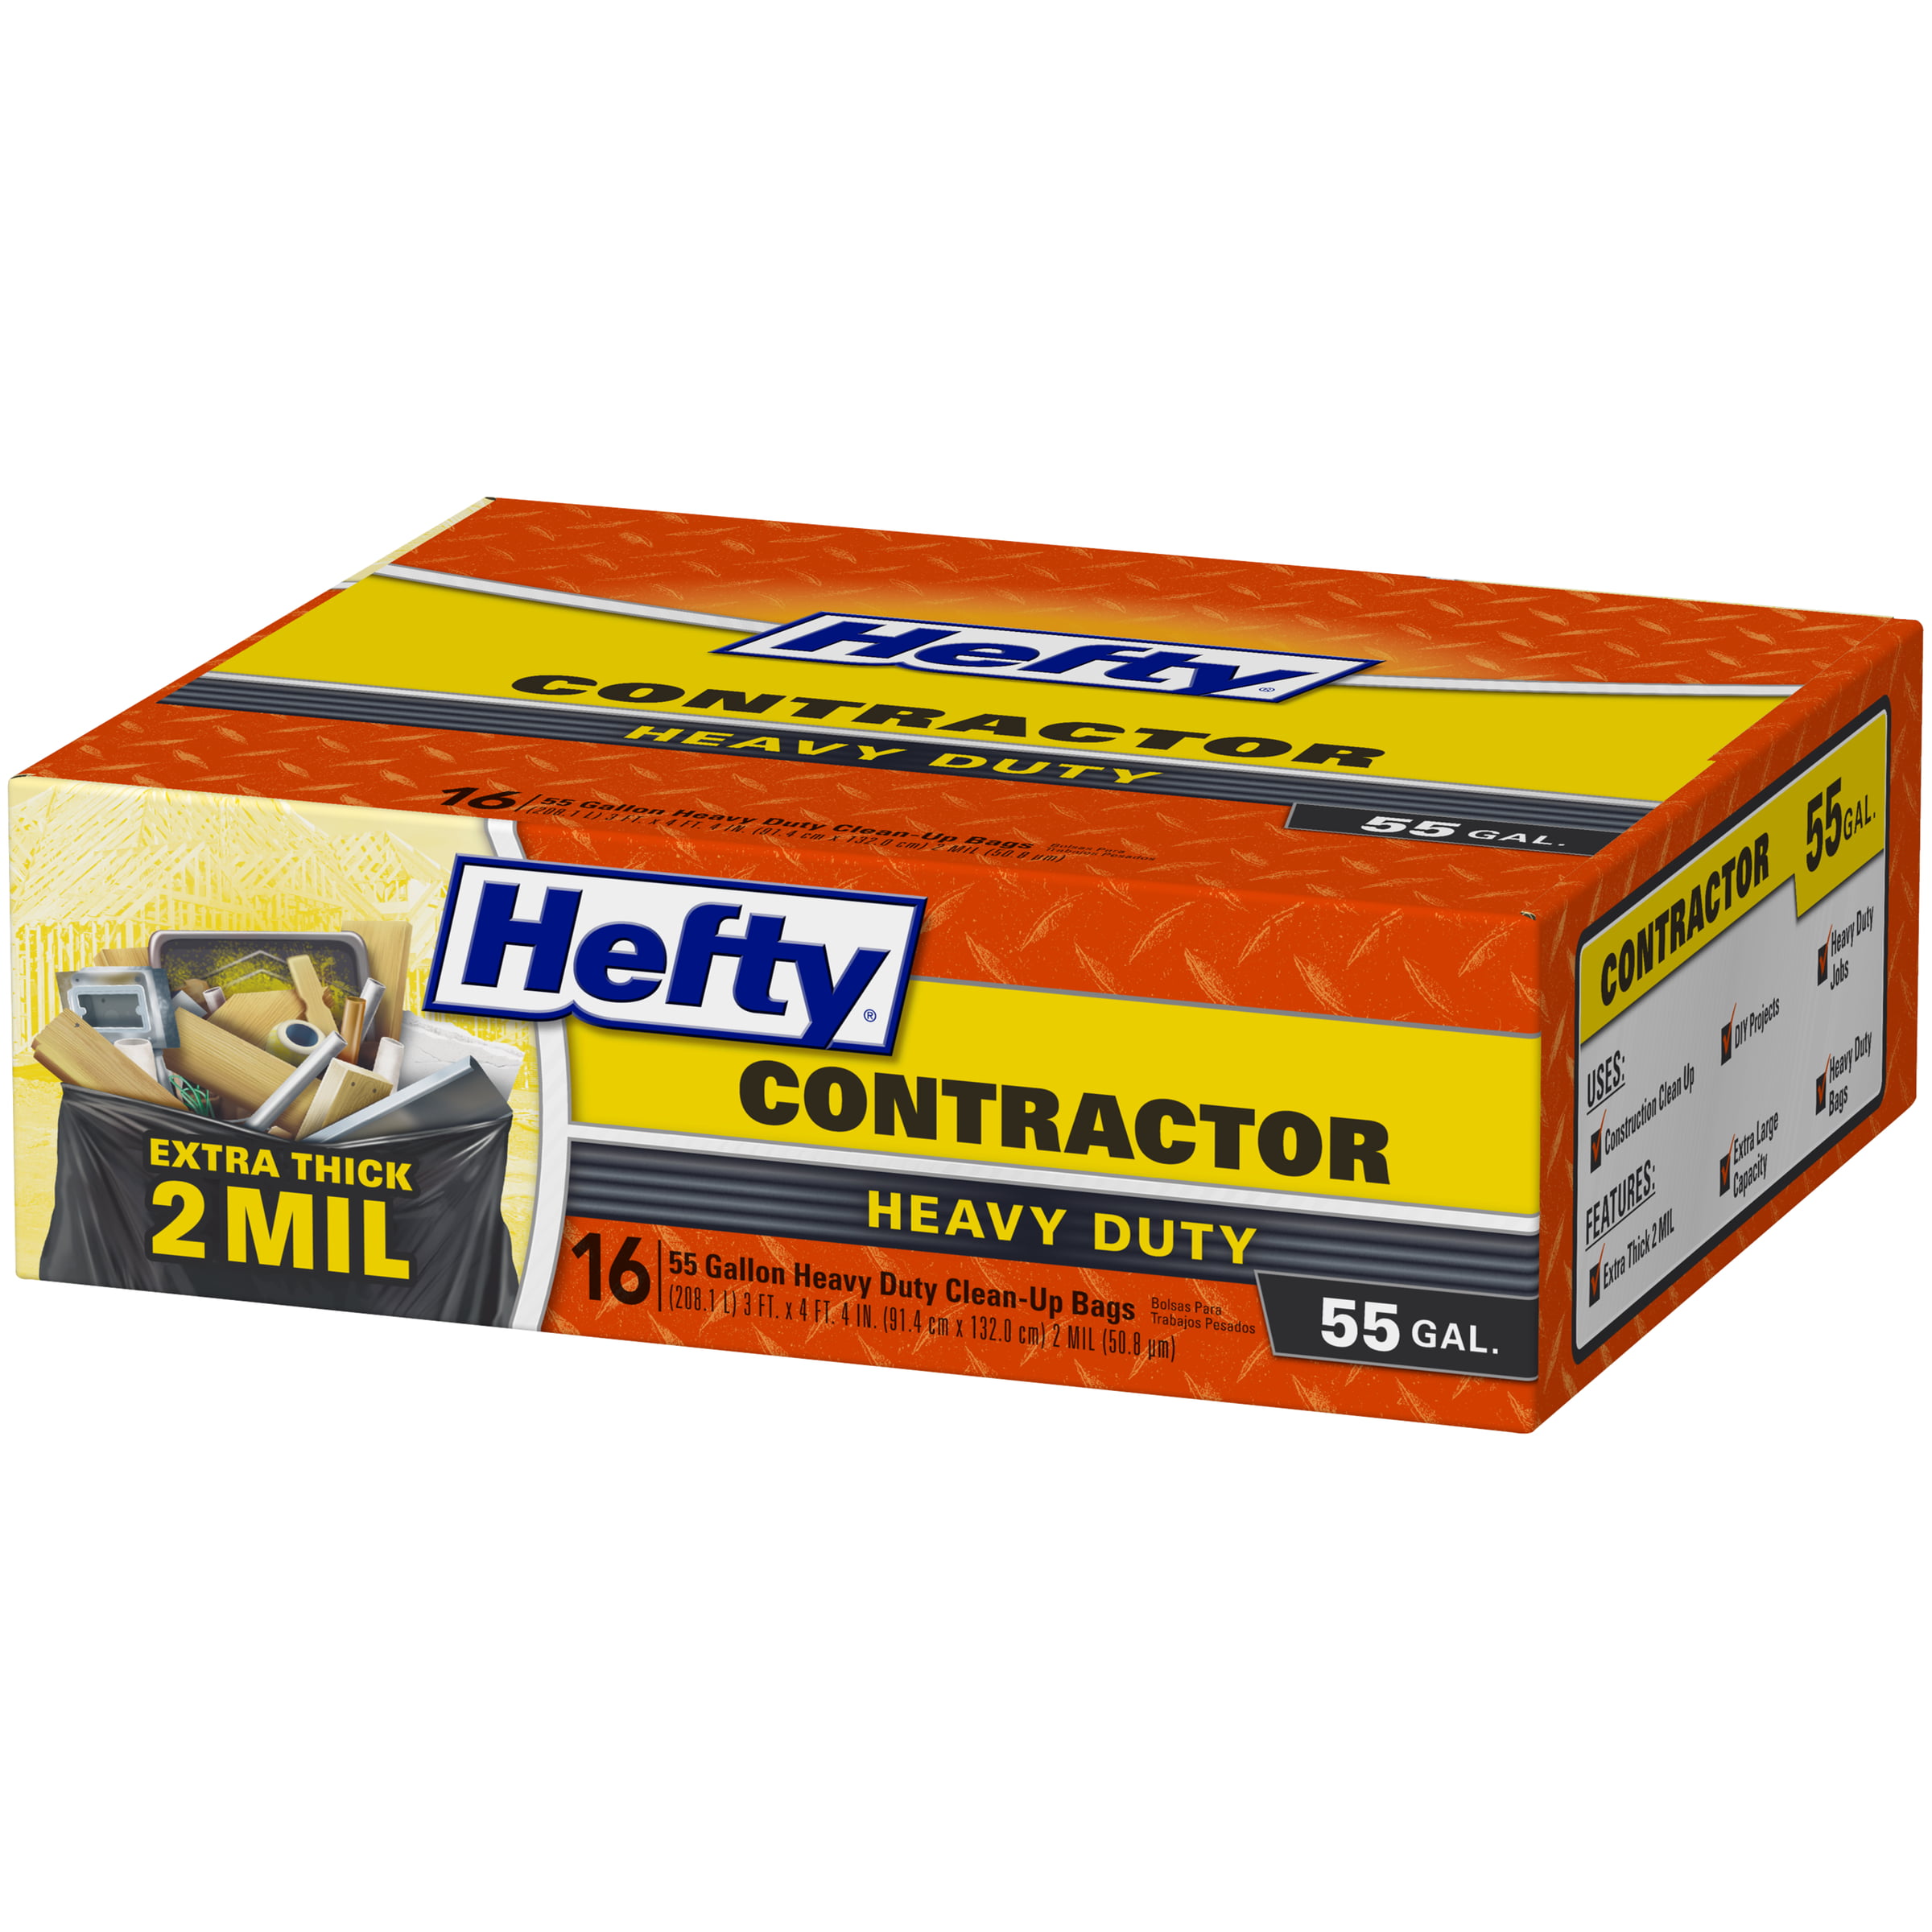 Hefty Heavy Duty Contractor Trash Bags 2 pack 55 Gallon 16 Count 